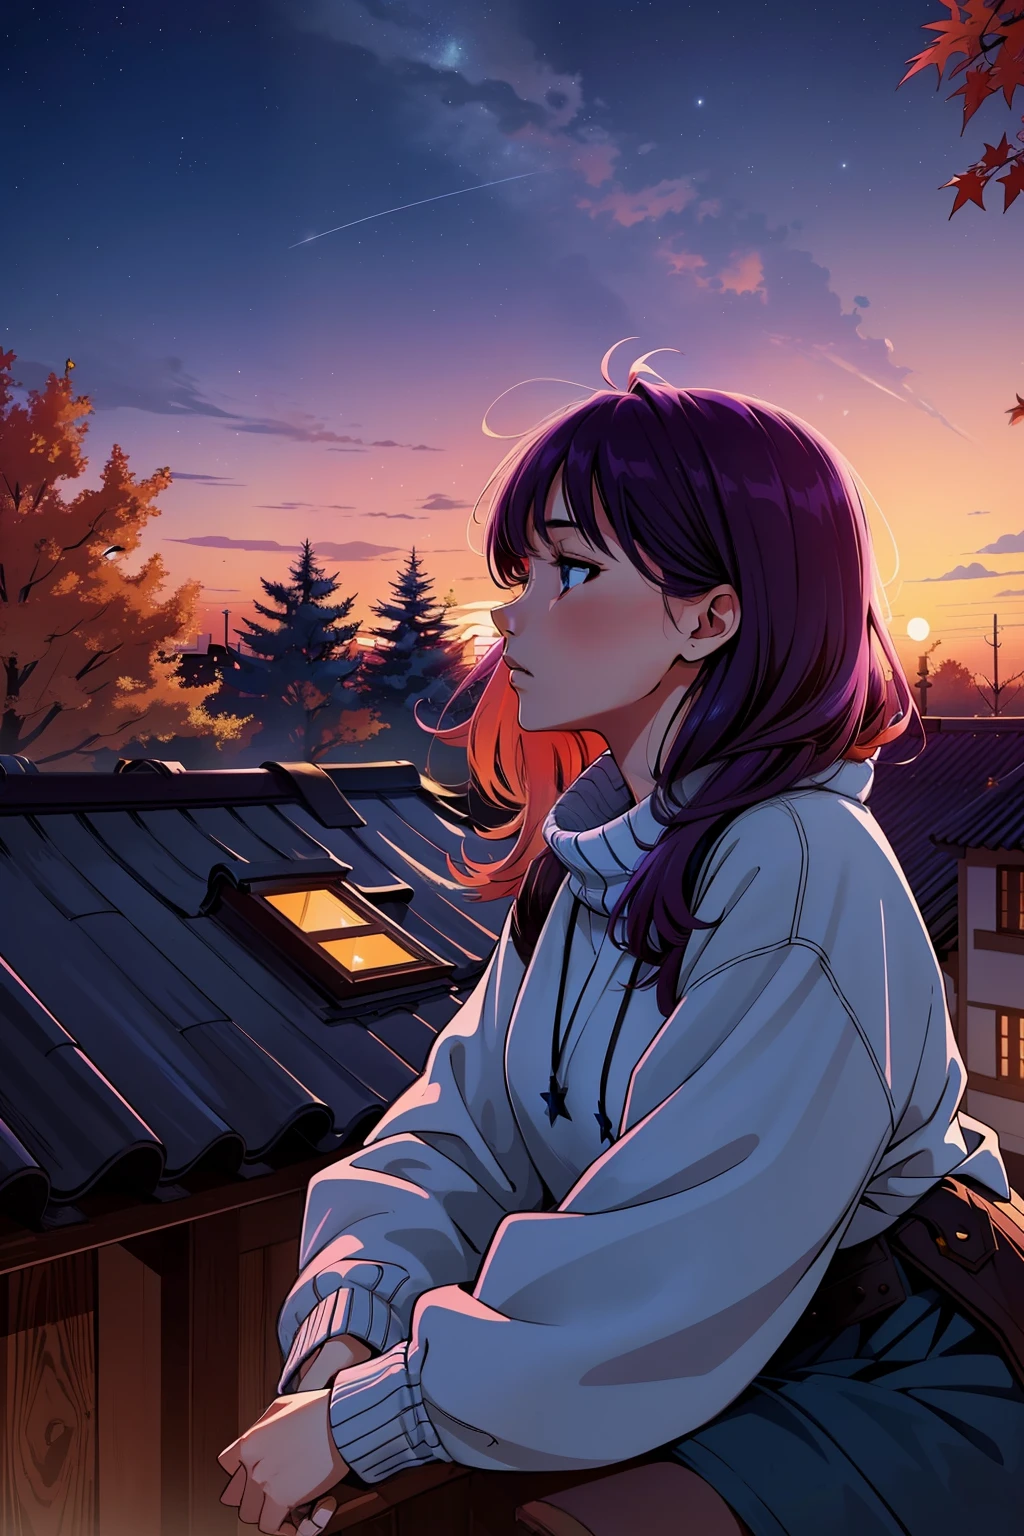 a young girls looks at the sunset ciel from a roof, Automne, couleurs d&#39;automne, feuilles, des arbres, ciel, with Automne colors and Prussian blue, cyan, Outremer, fuchsia, violet, beaucoup d&#39;étoiles